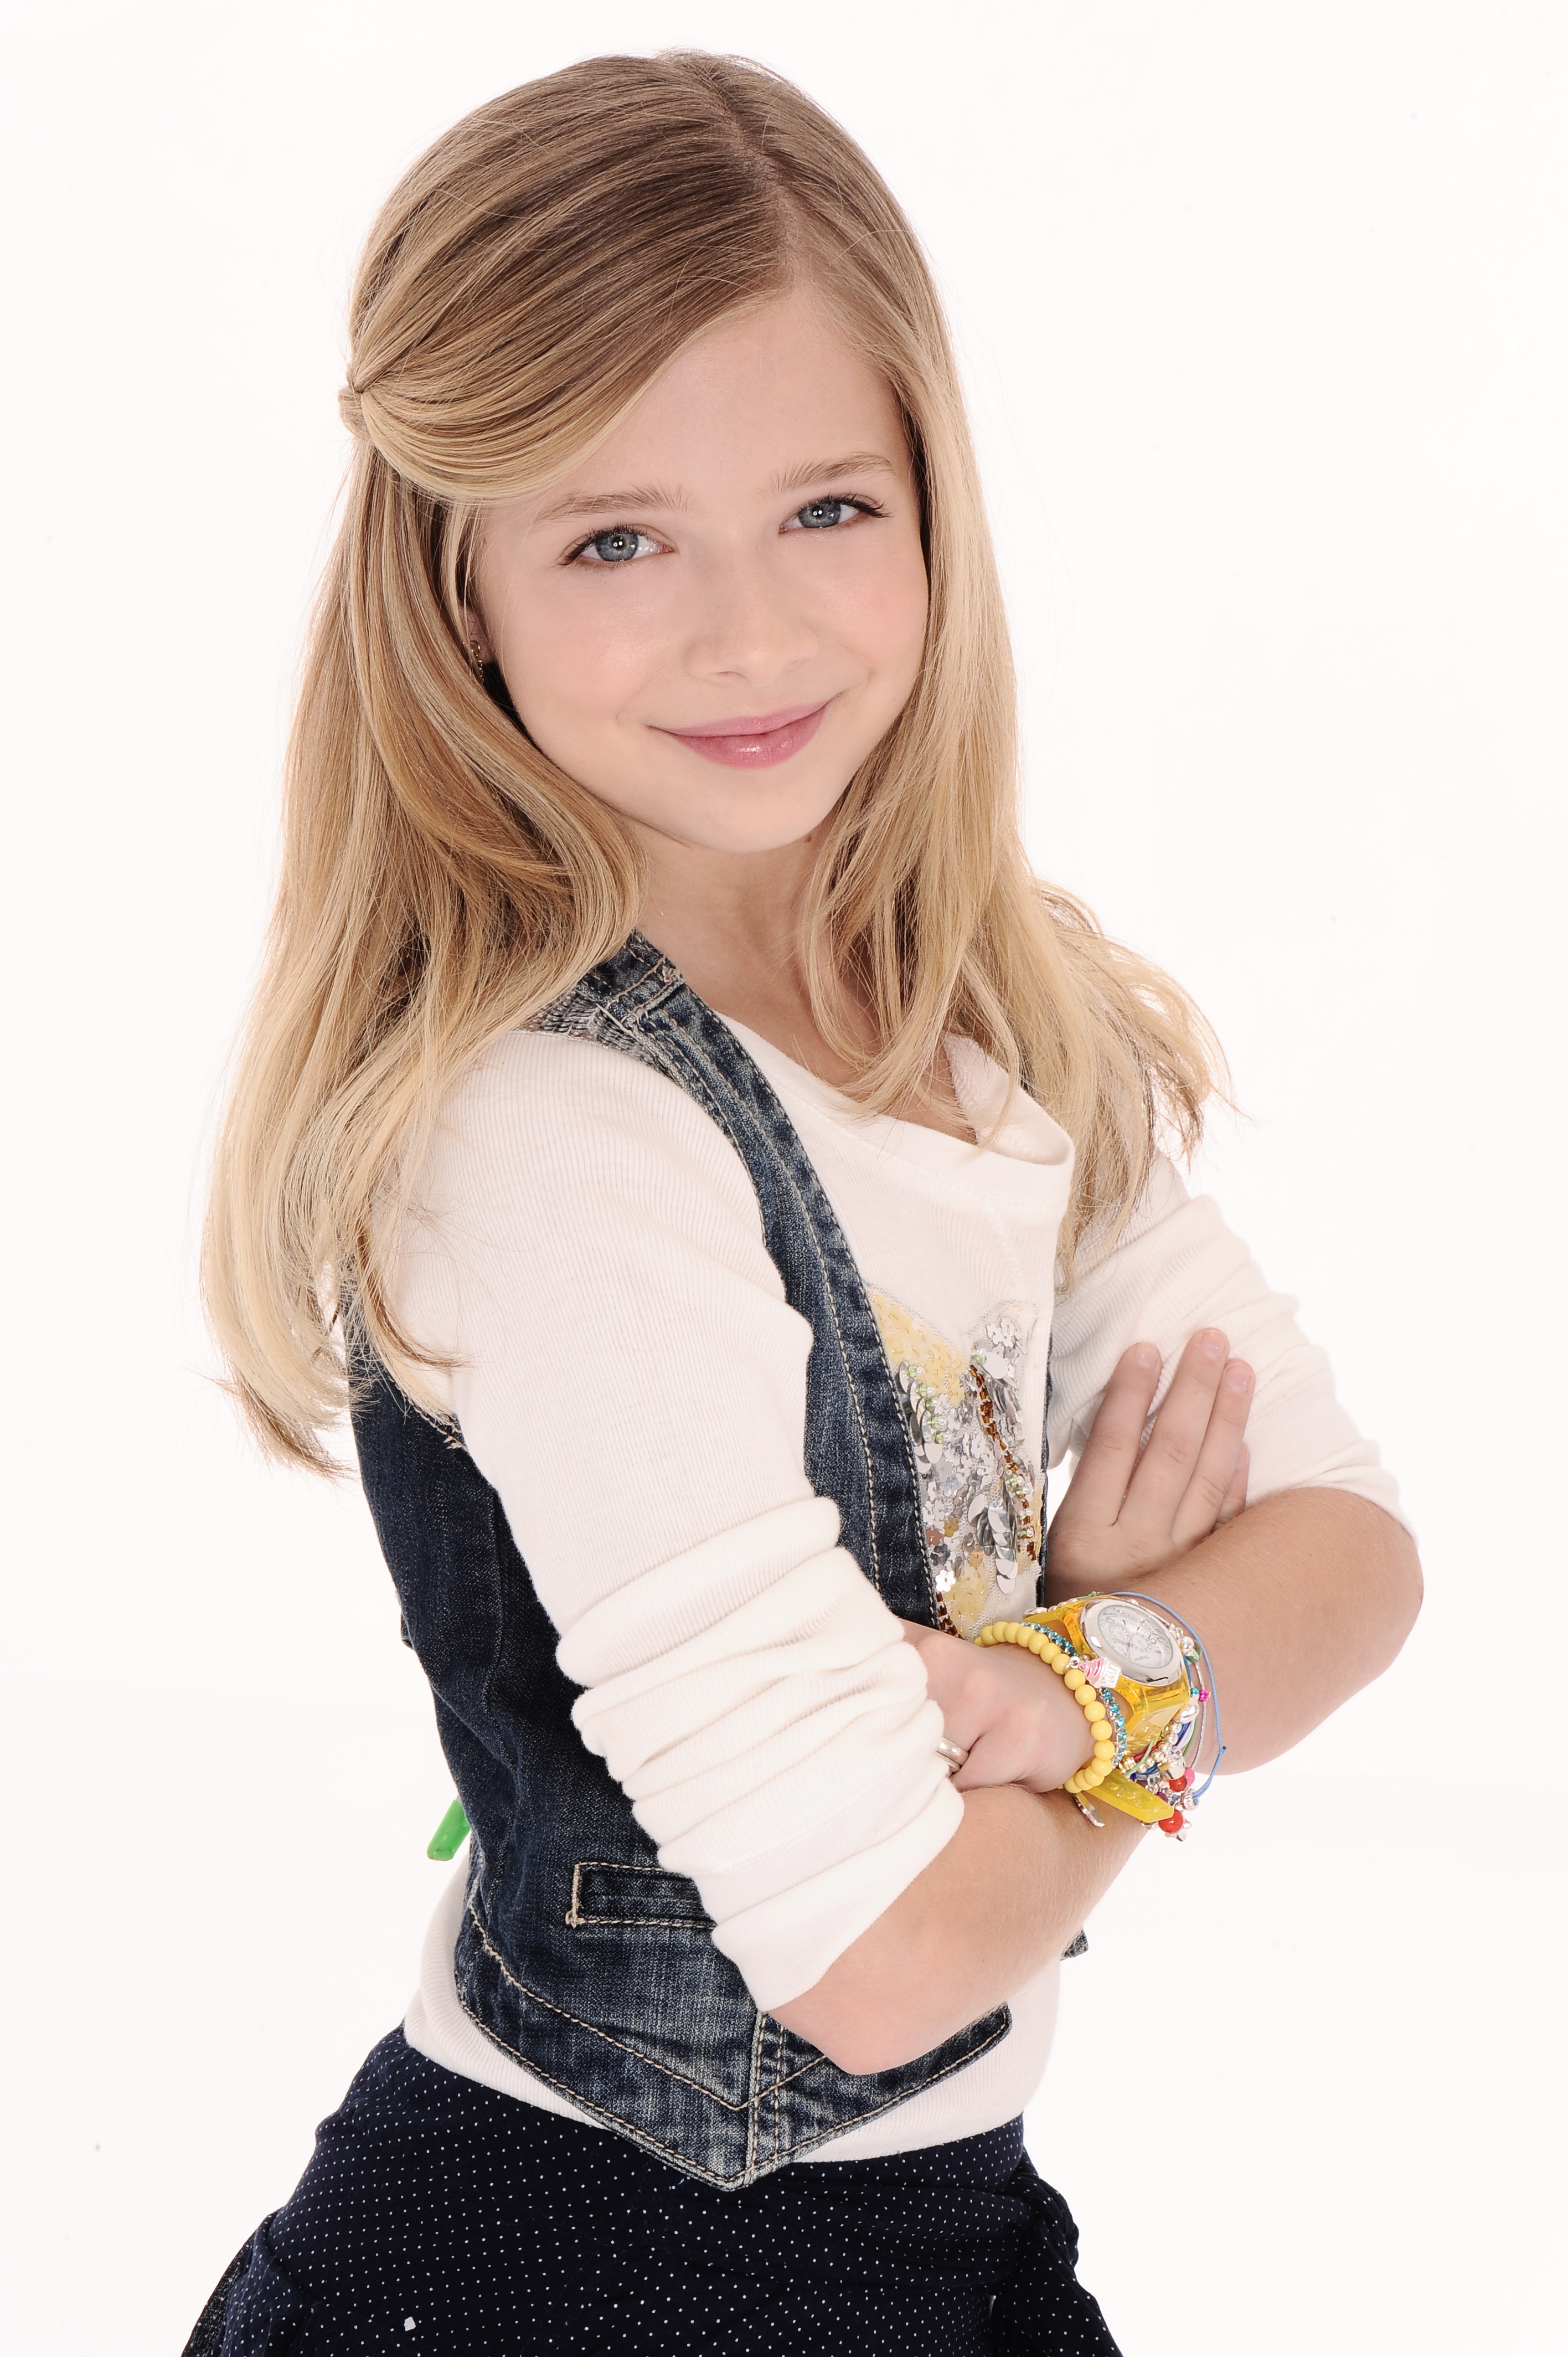 Jackie Evancho Backgrounds on Wallpapers Vista